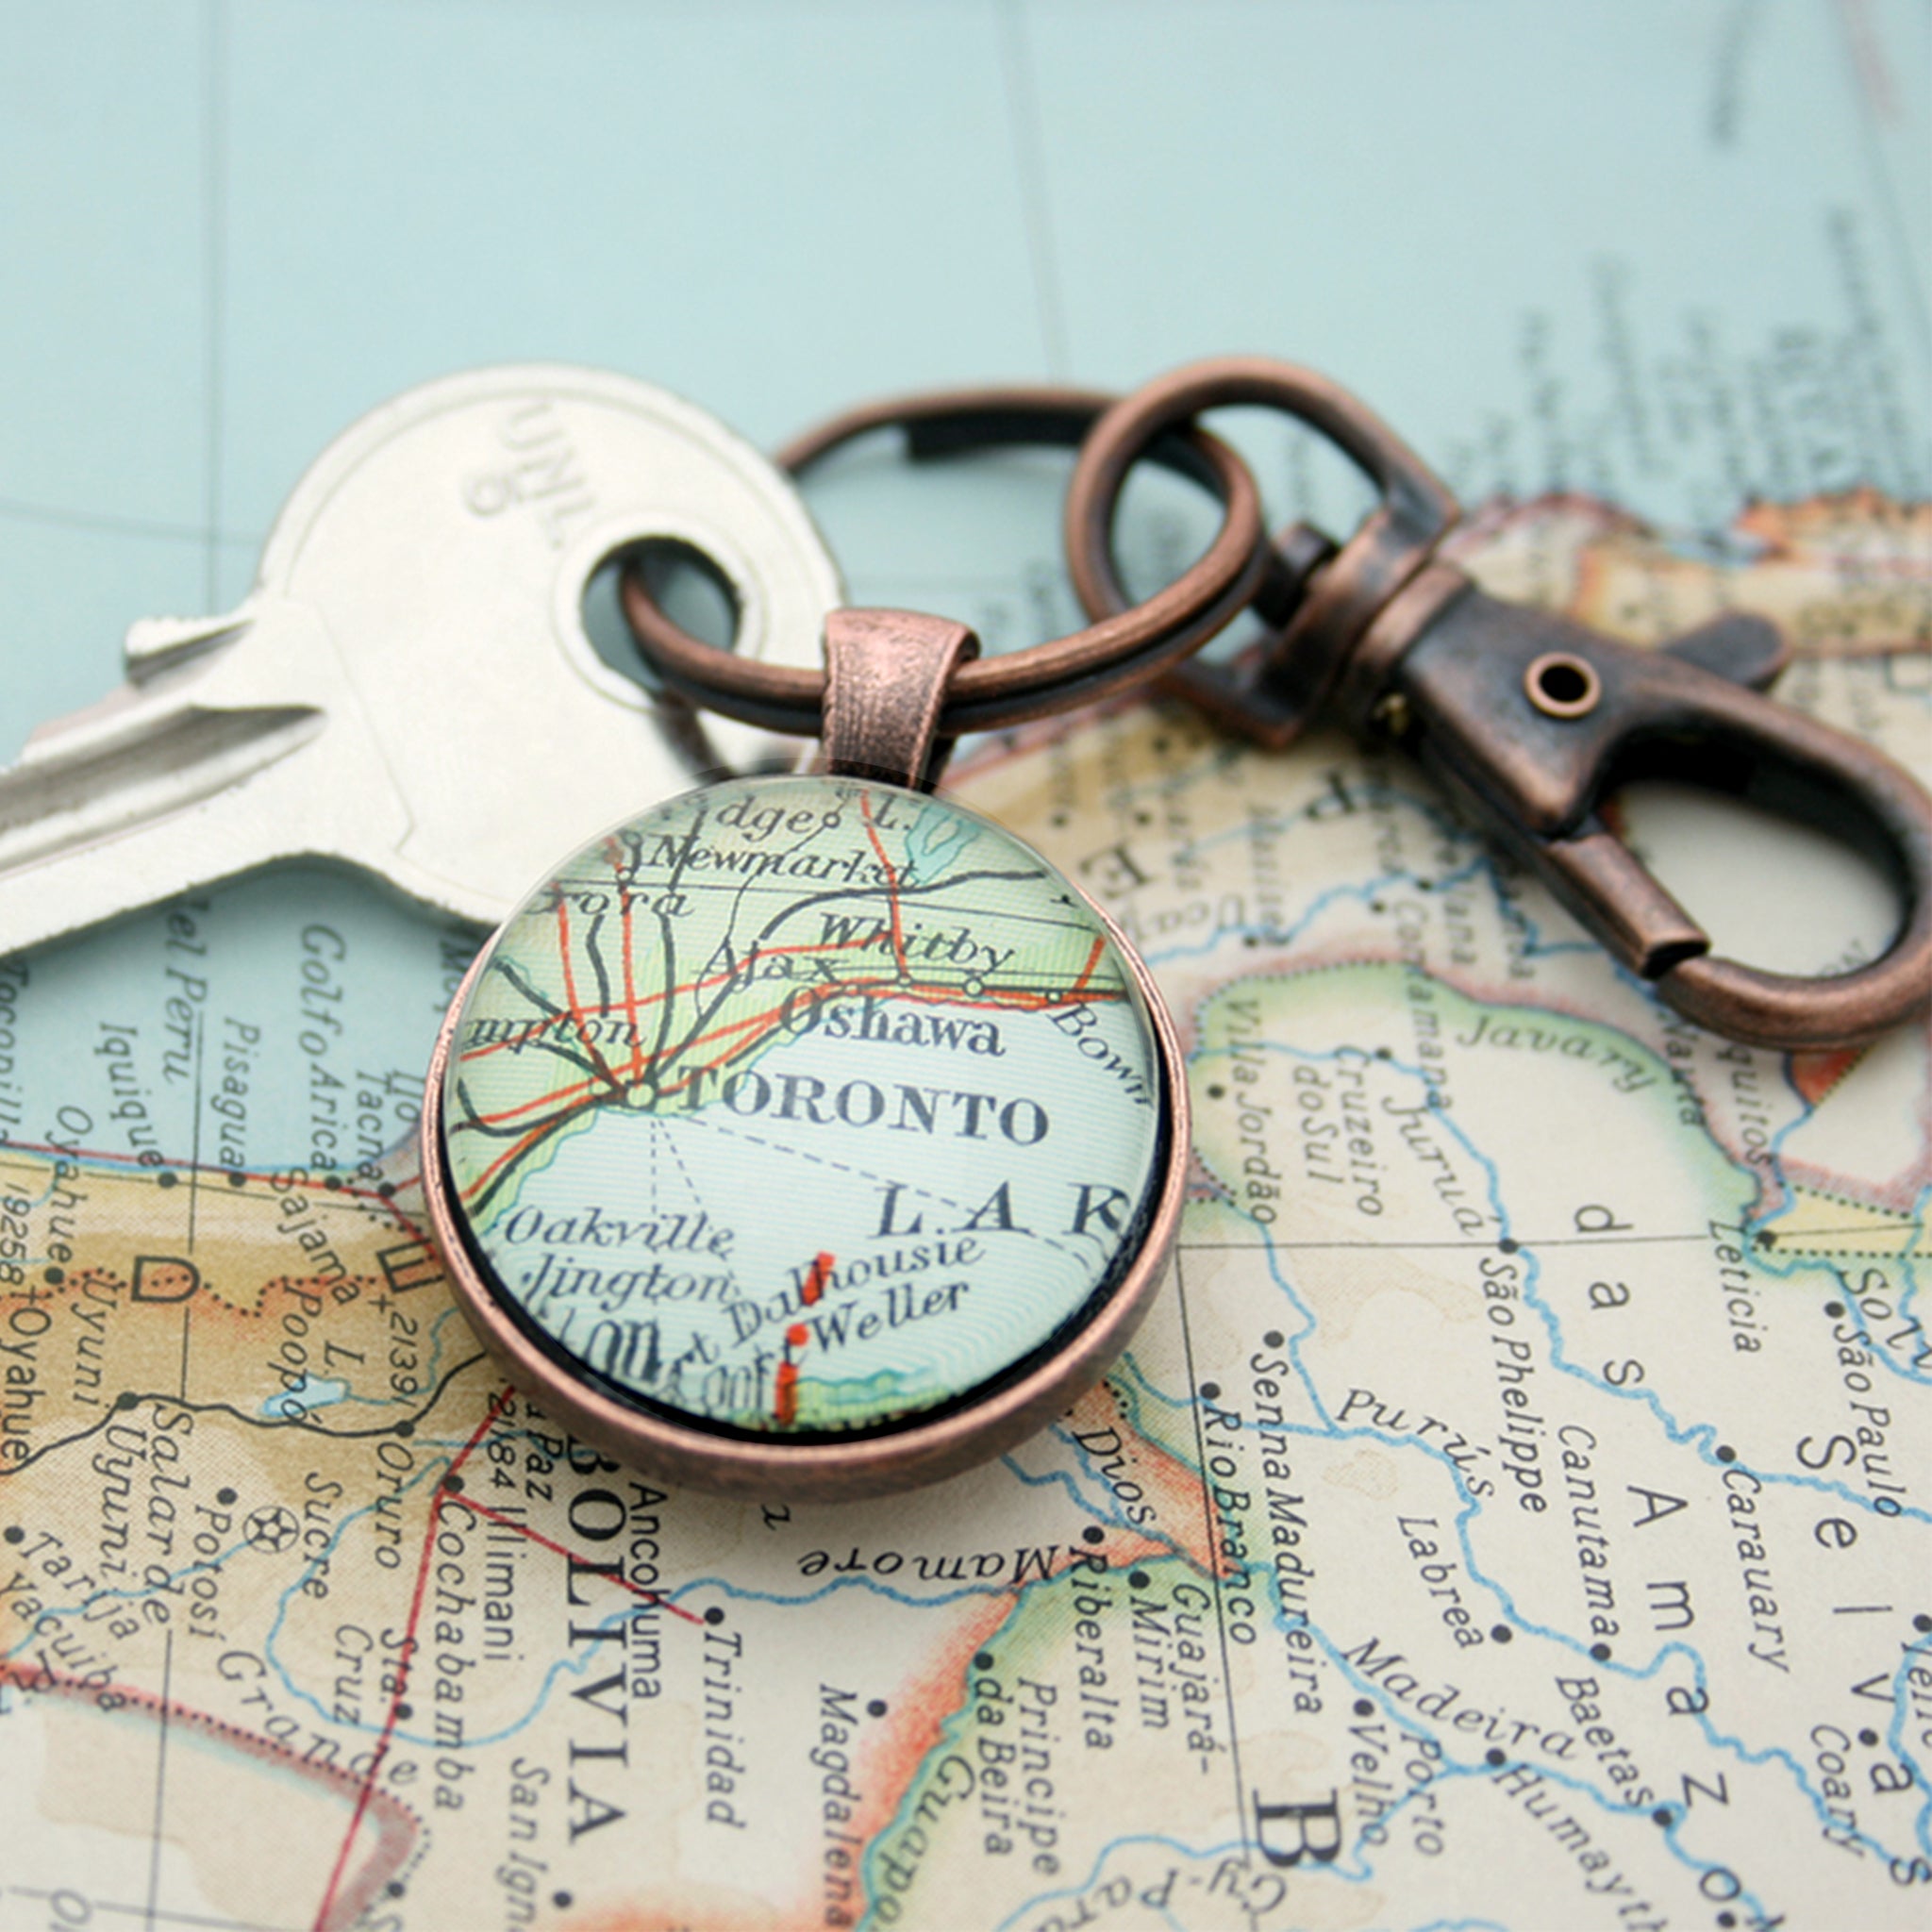 Personalised Keyring in copper color featuring map of Toronto